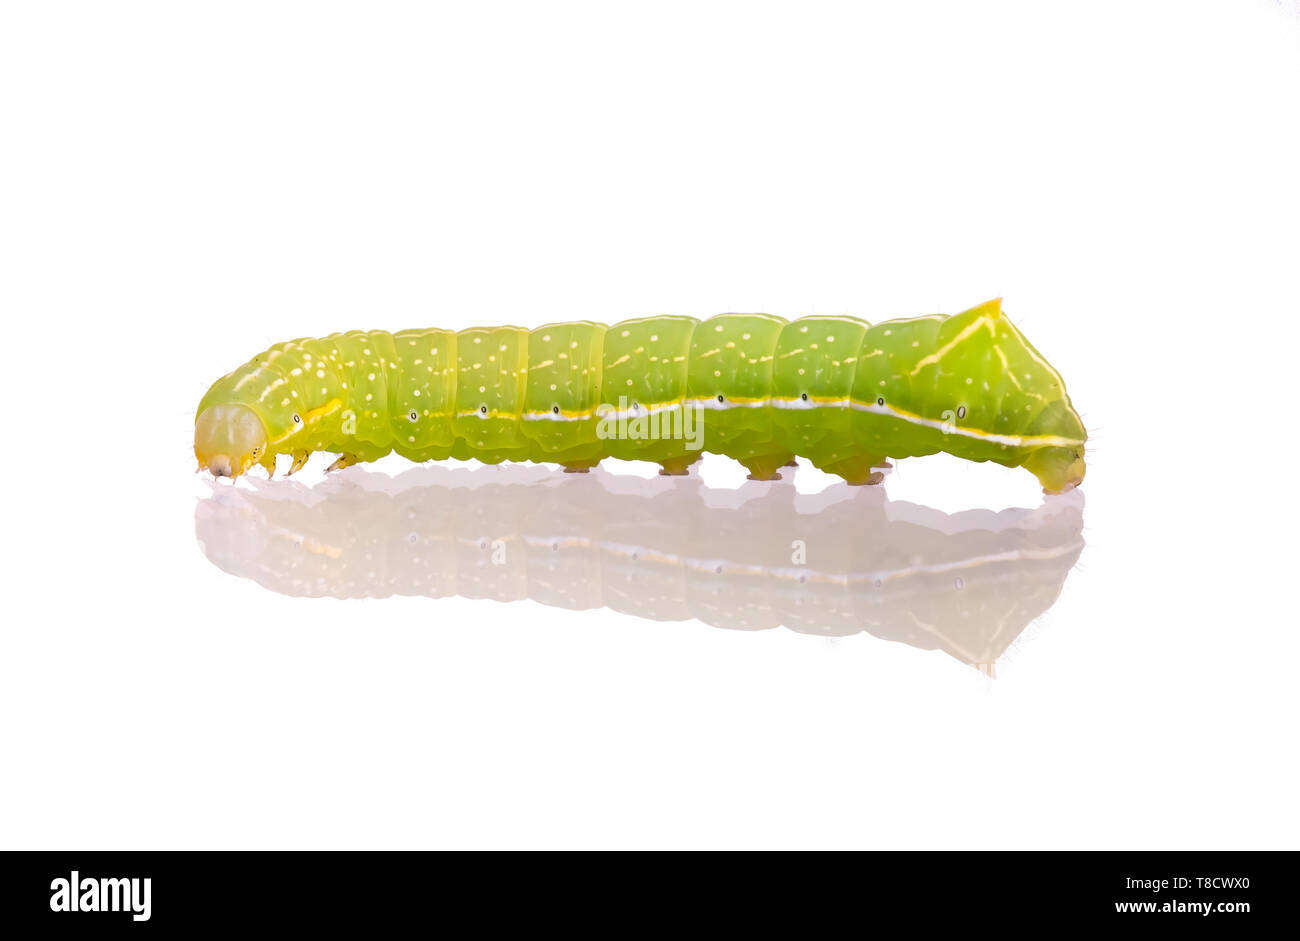 Green caterpillar with yellow, white and black markings. Amphipyra pyramidoides, Copper Underwing Moth larva, early instar. Isolated on white. Stock Photo